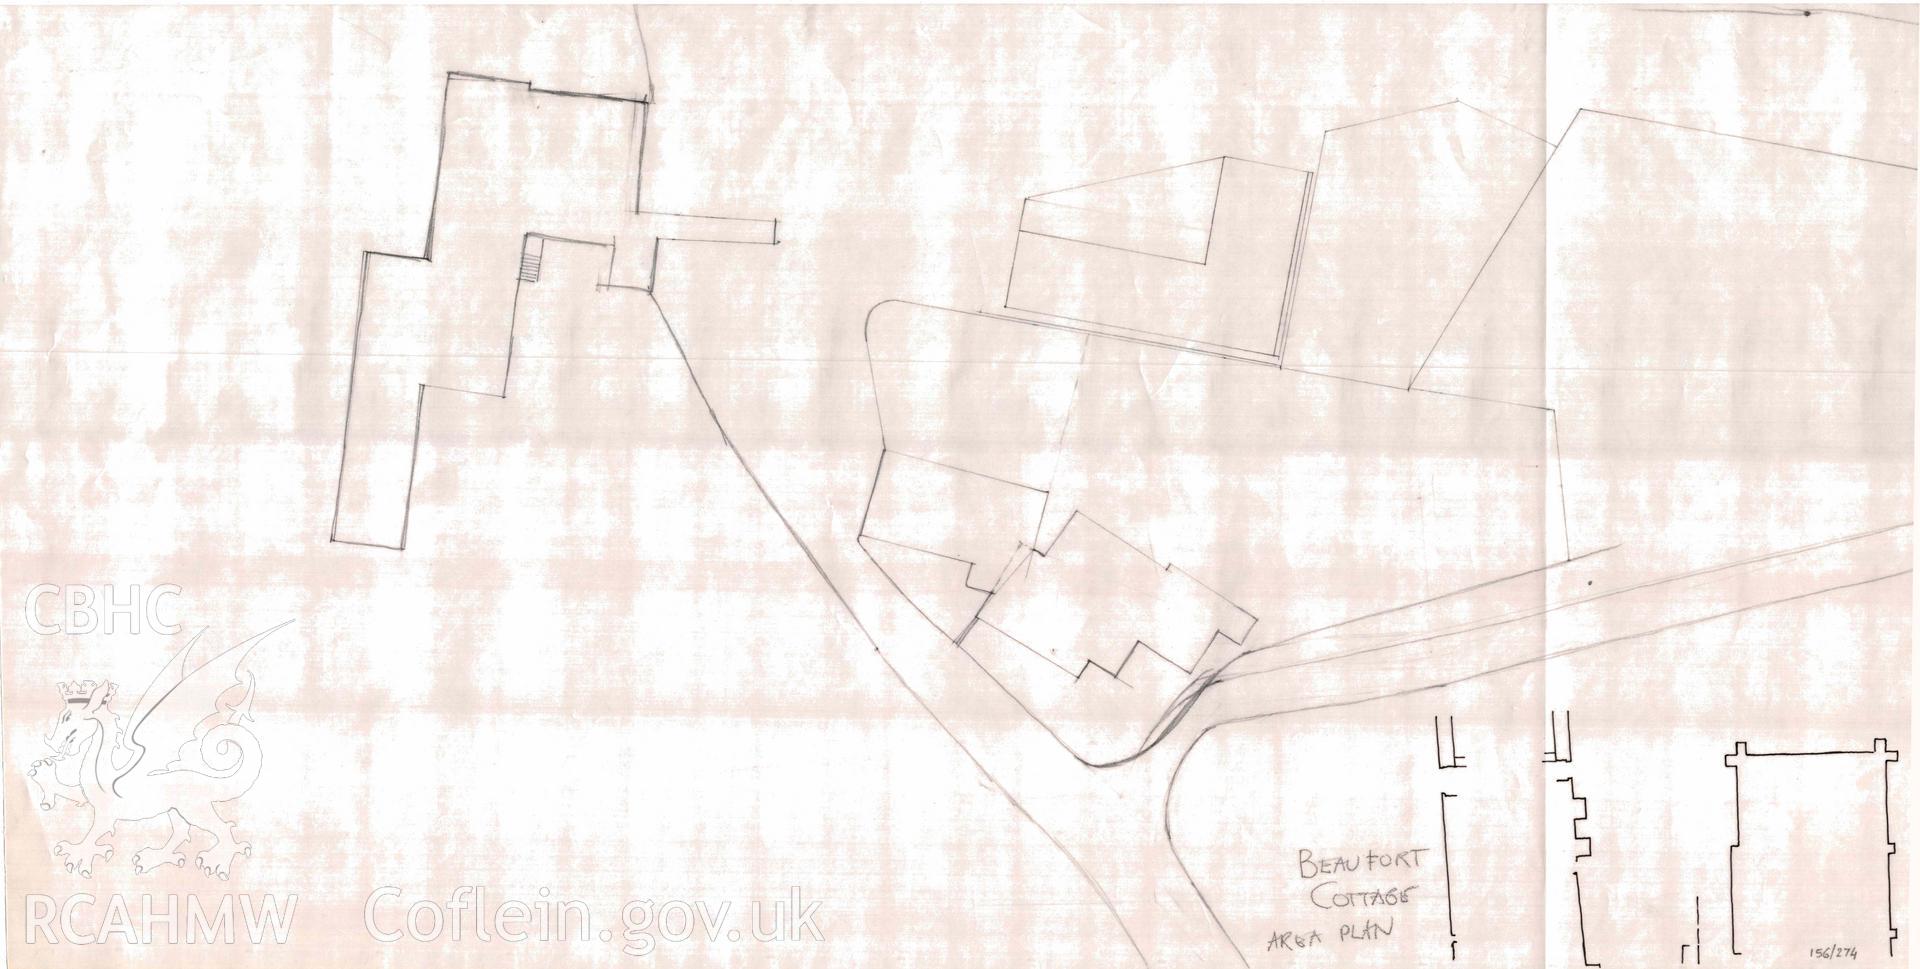 Cadw guardianship monument drawing, rough plan of Beaufort Cottage area, Tintern Abbey.  Undated.